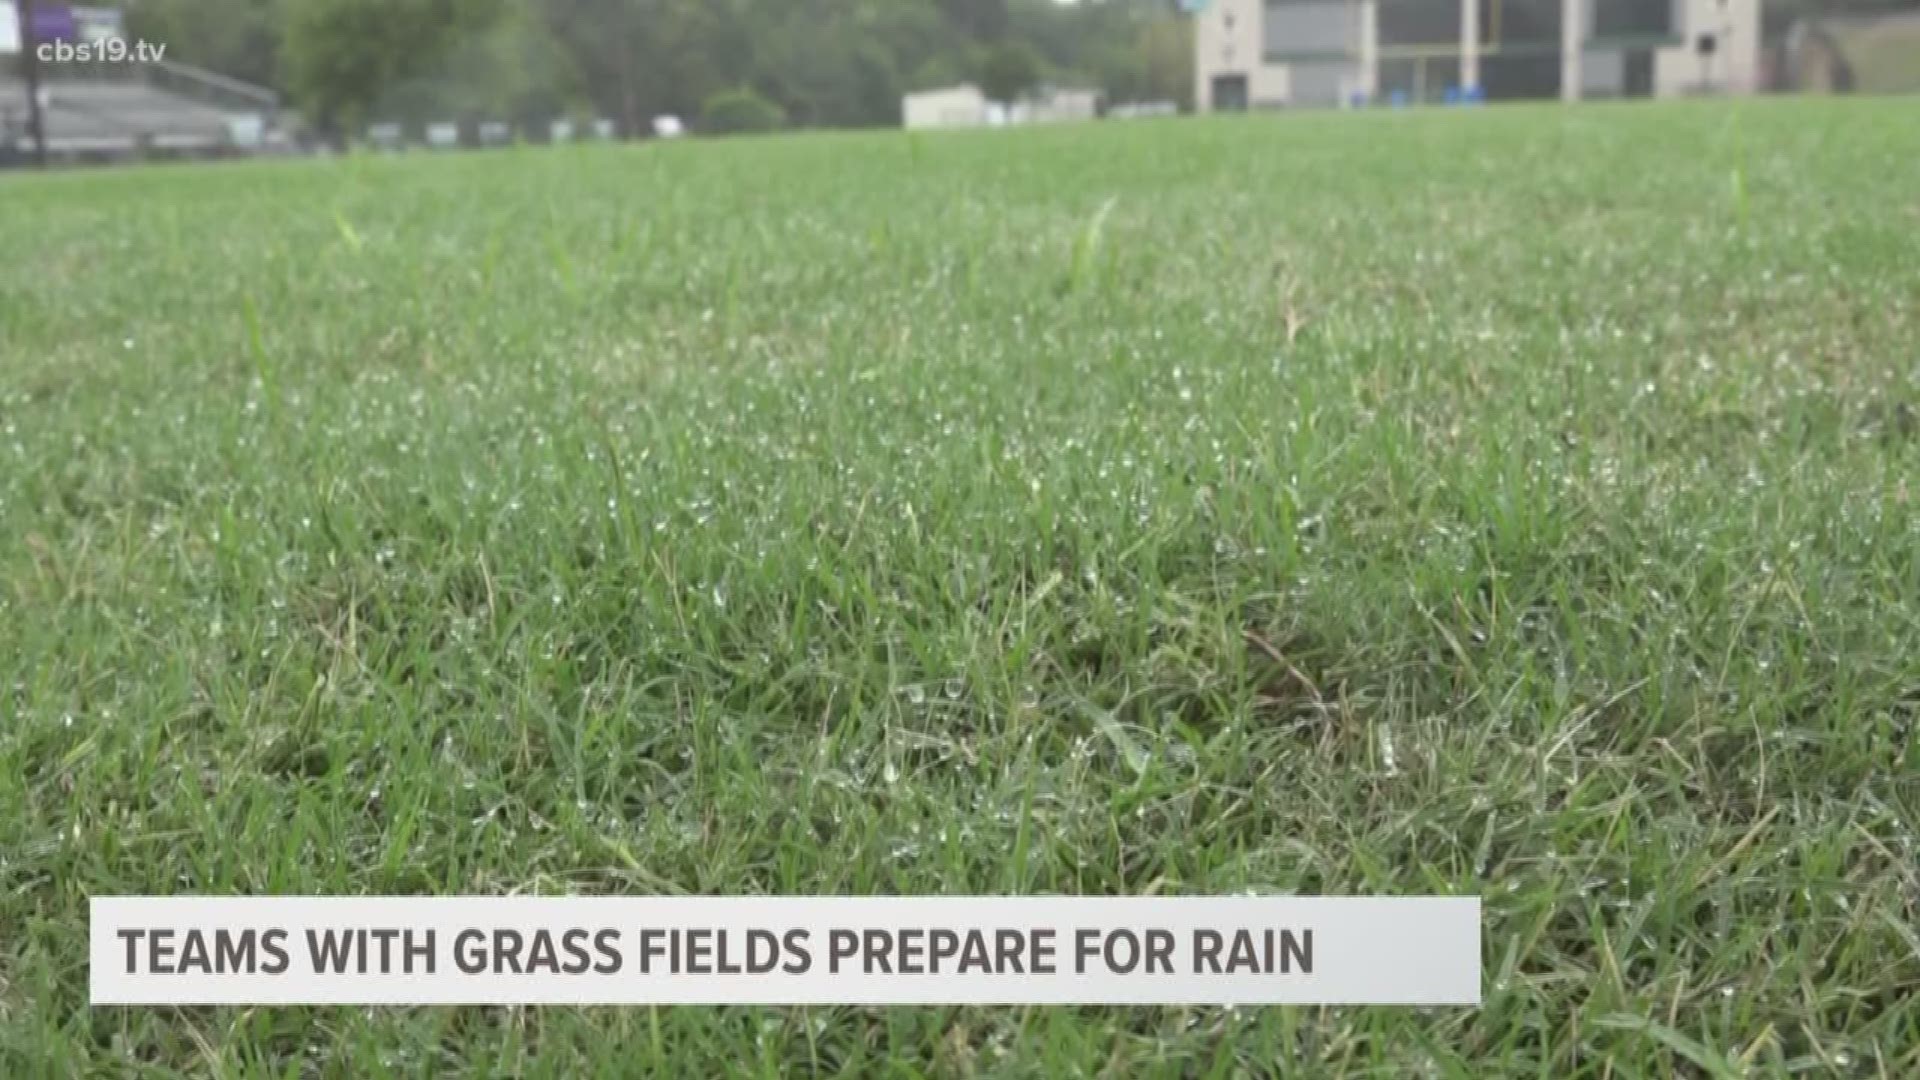 Heavy rain means some schools with grass fields face moving or cancelling their football games to avoid injuries or costly field repairs.